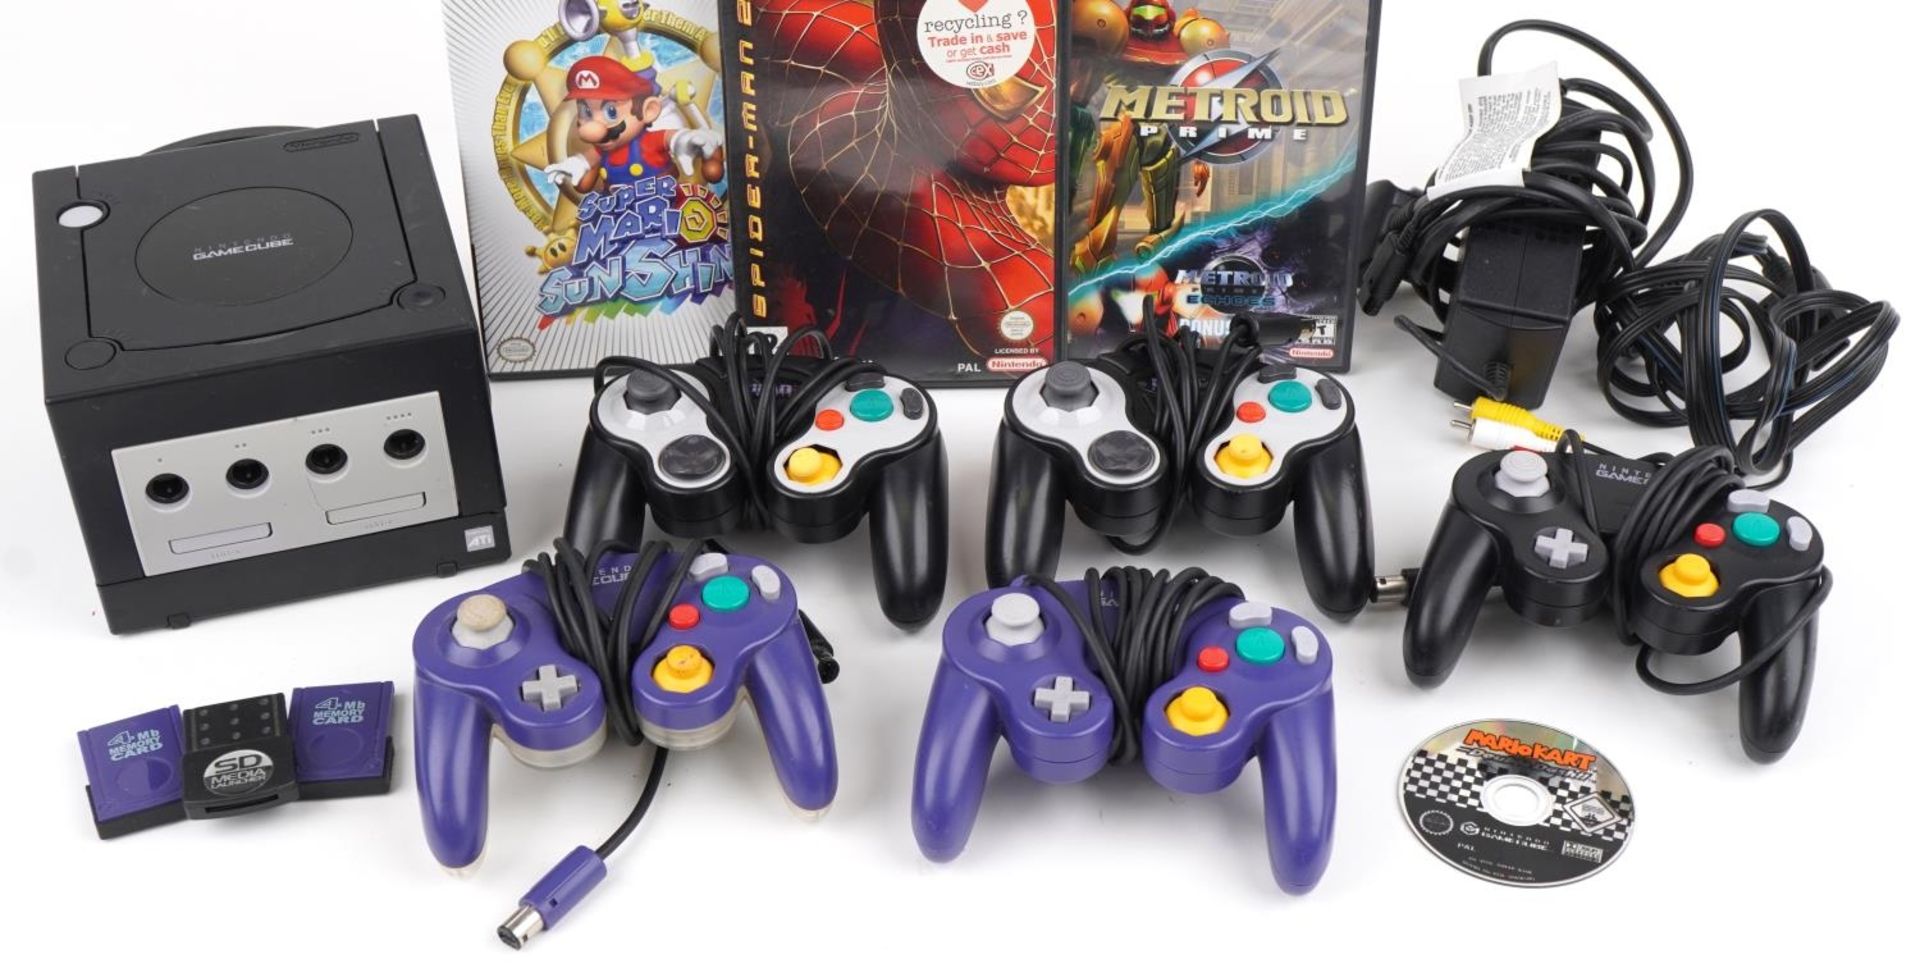 Vintage Nintendo Game Cube games console with controllers and various games including Super Mario - Bild 3 aus 3